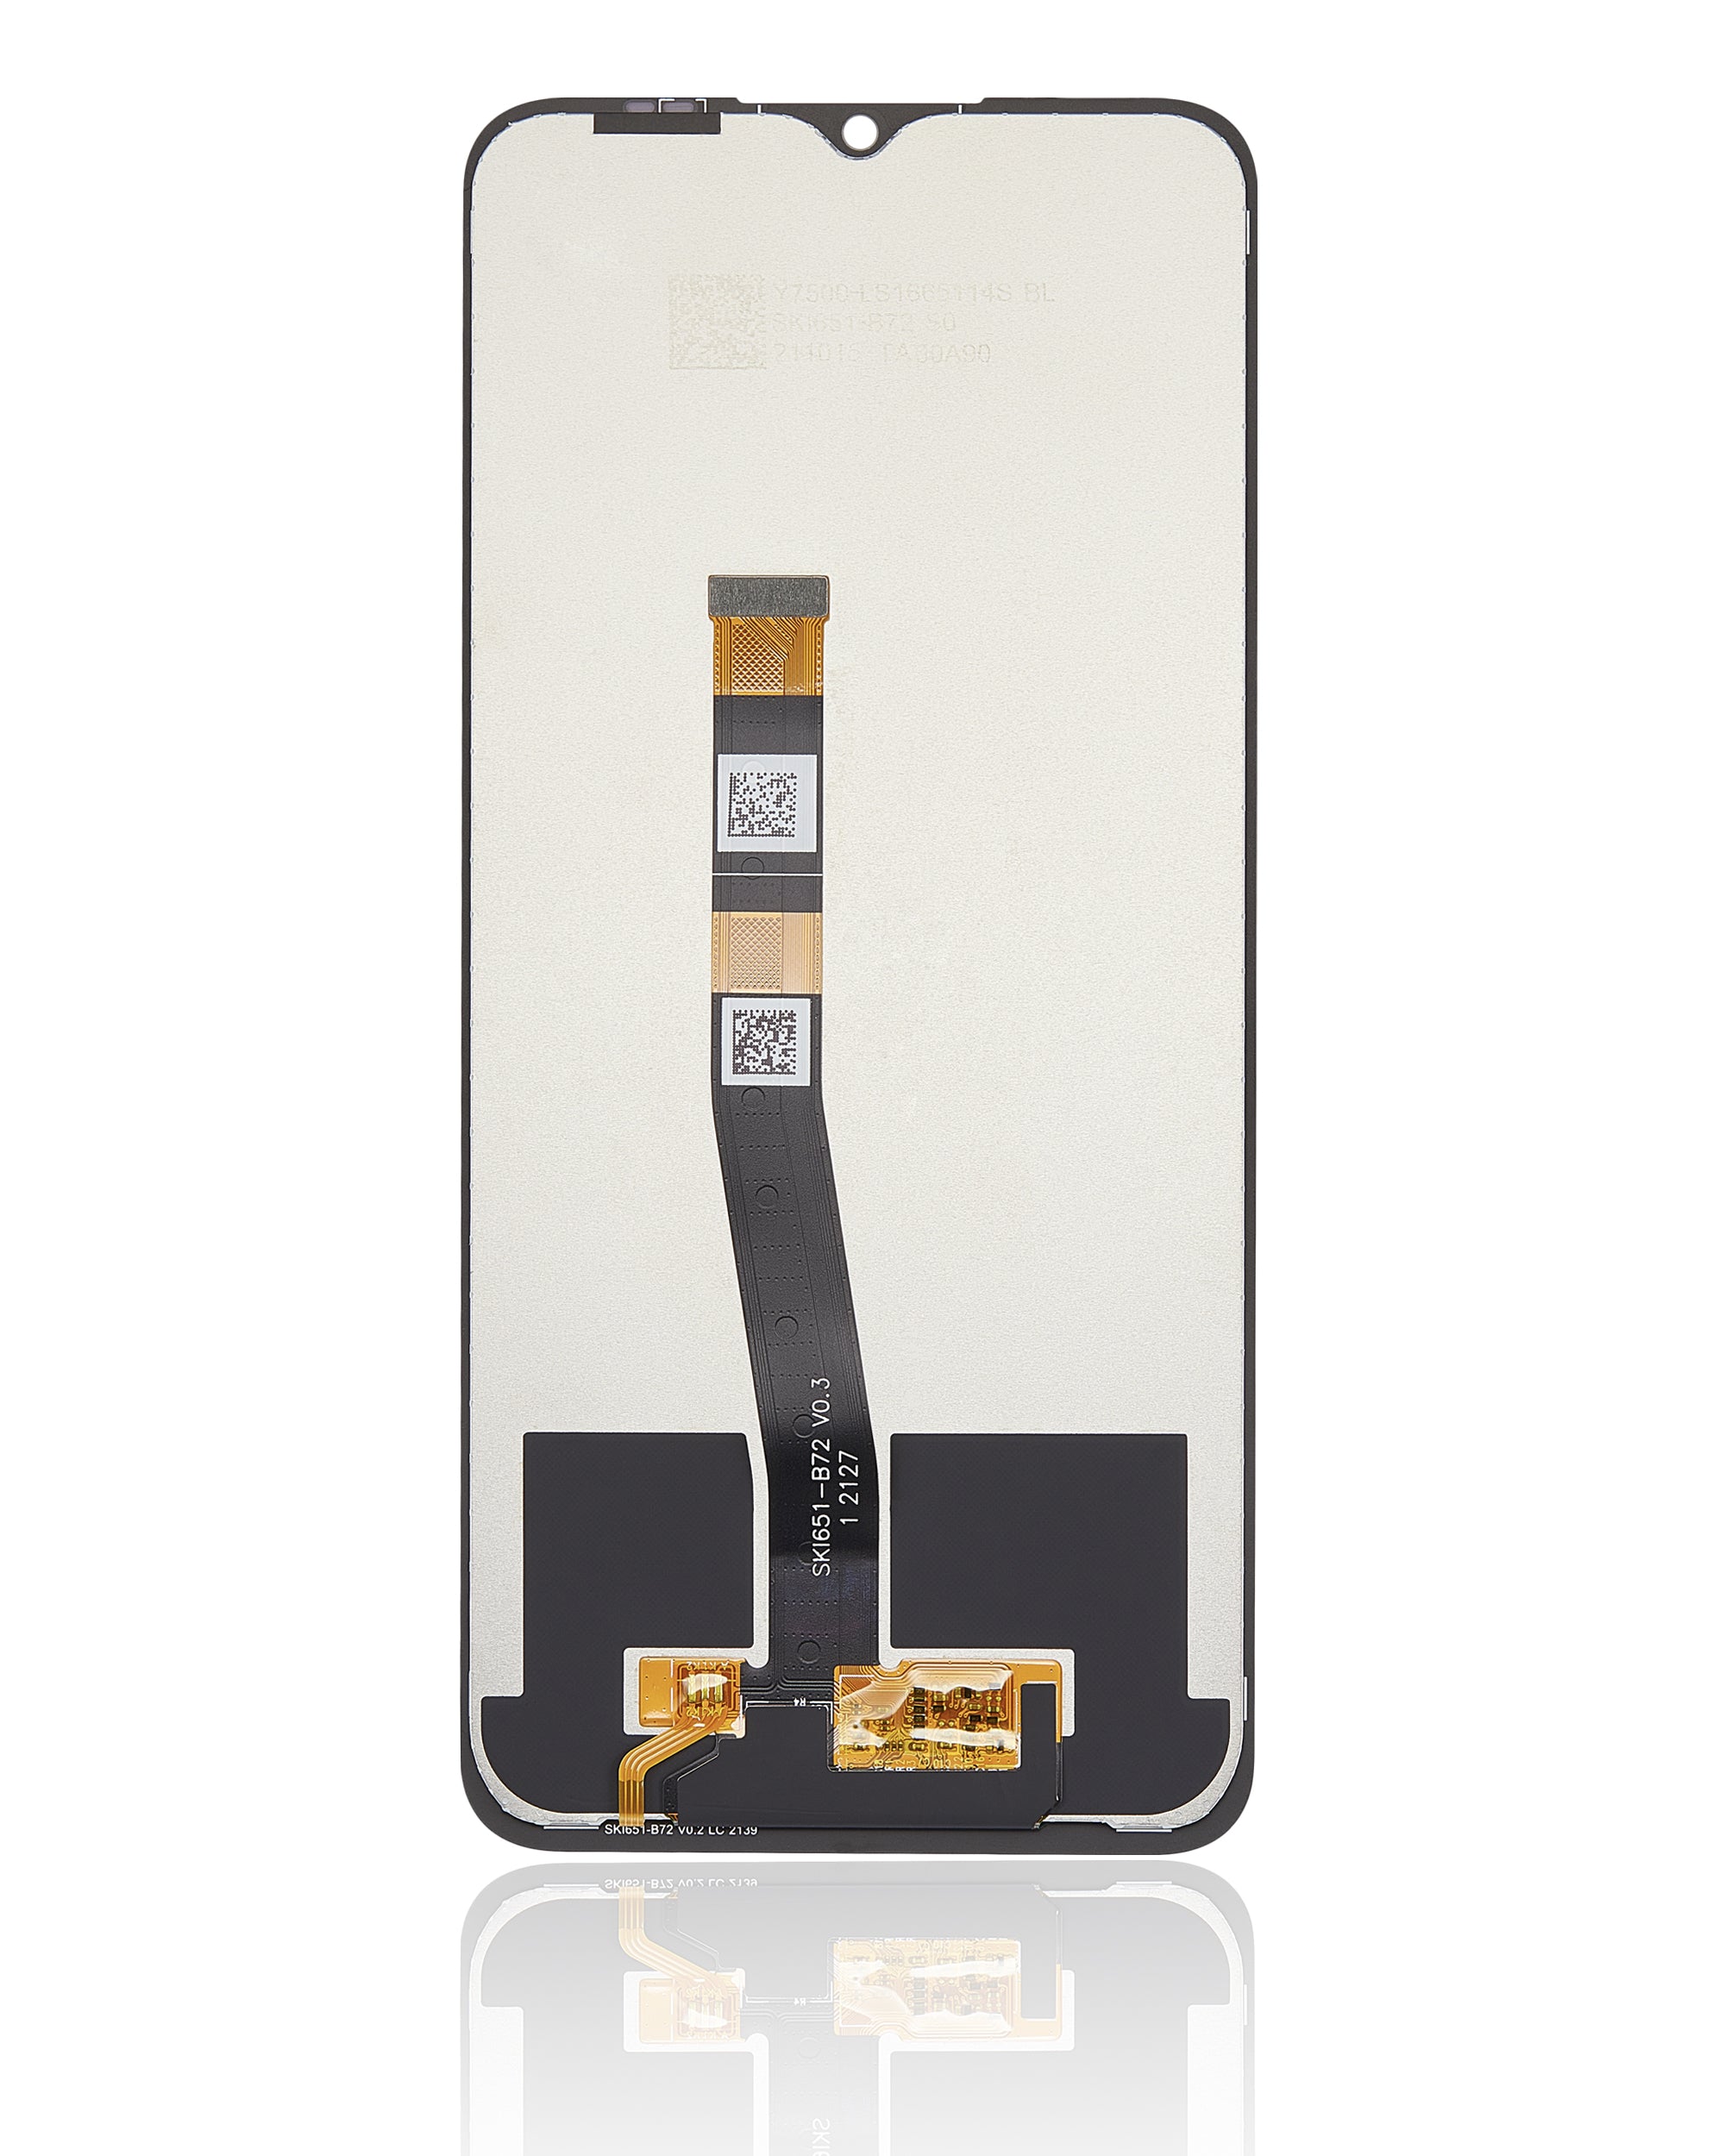 For Boost Mobile Celero 5G LCD Screen Replacement Without Frame (Premium) (All Colors)